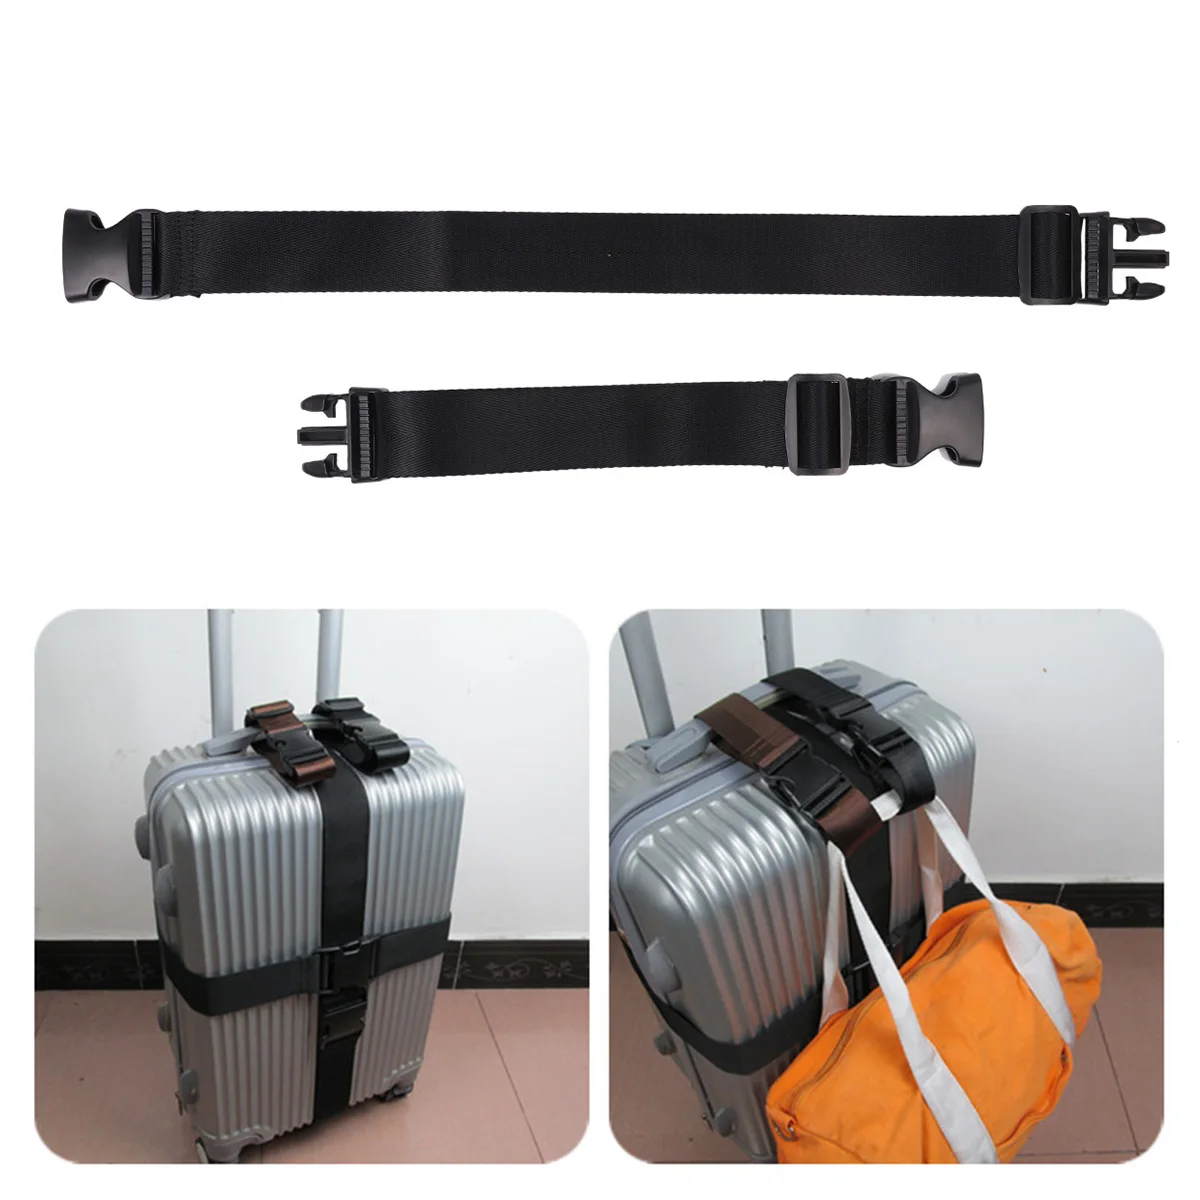 Grey Luggage Straps Luggage Accessories Straps Travel Packing Organizers Travel Bag Storage Bag Portable Bungee Cord Bag Small Safe Travel Luggage Belt Luggage Packaging Storage Bag 